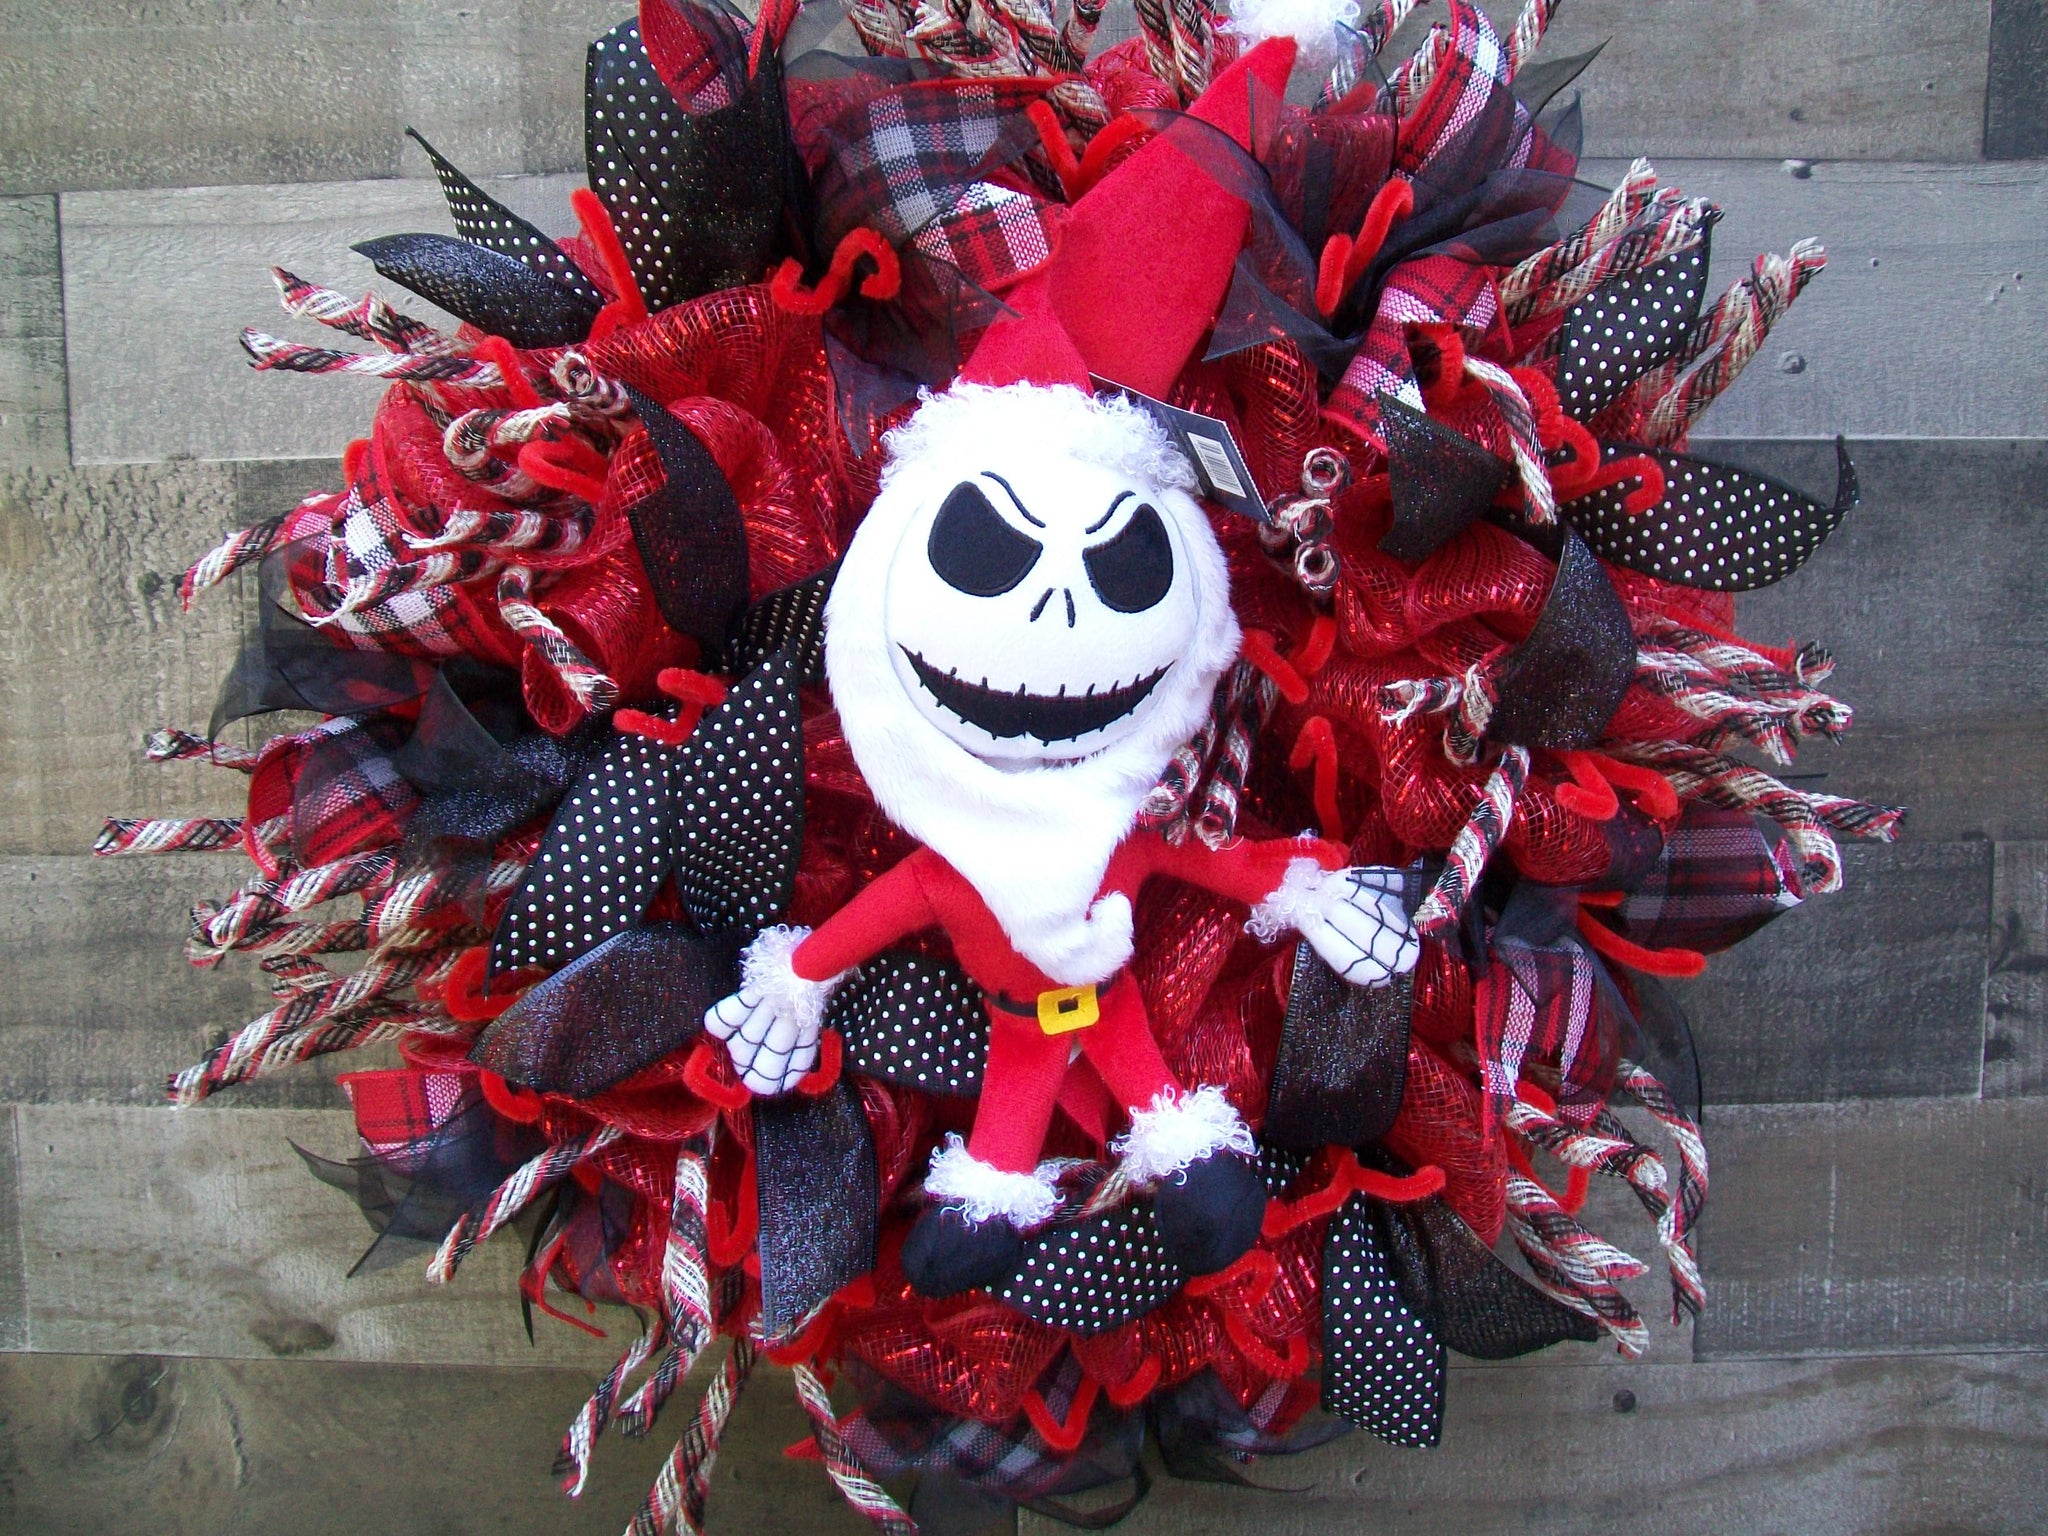 Nightmare Before Christmas Red & Black Mesh Wreath with Suffed Skeleton